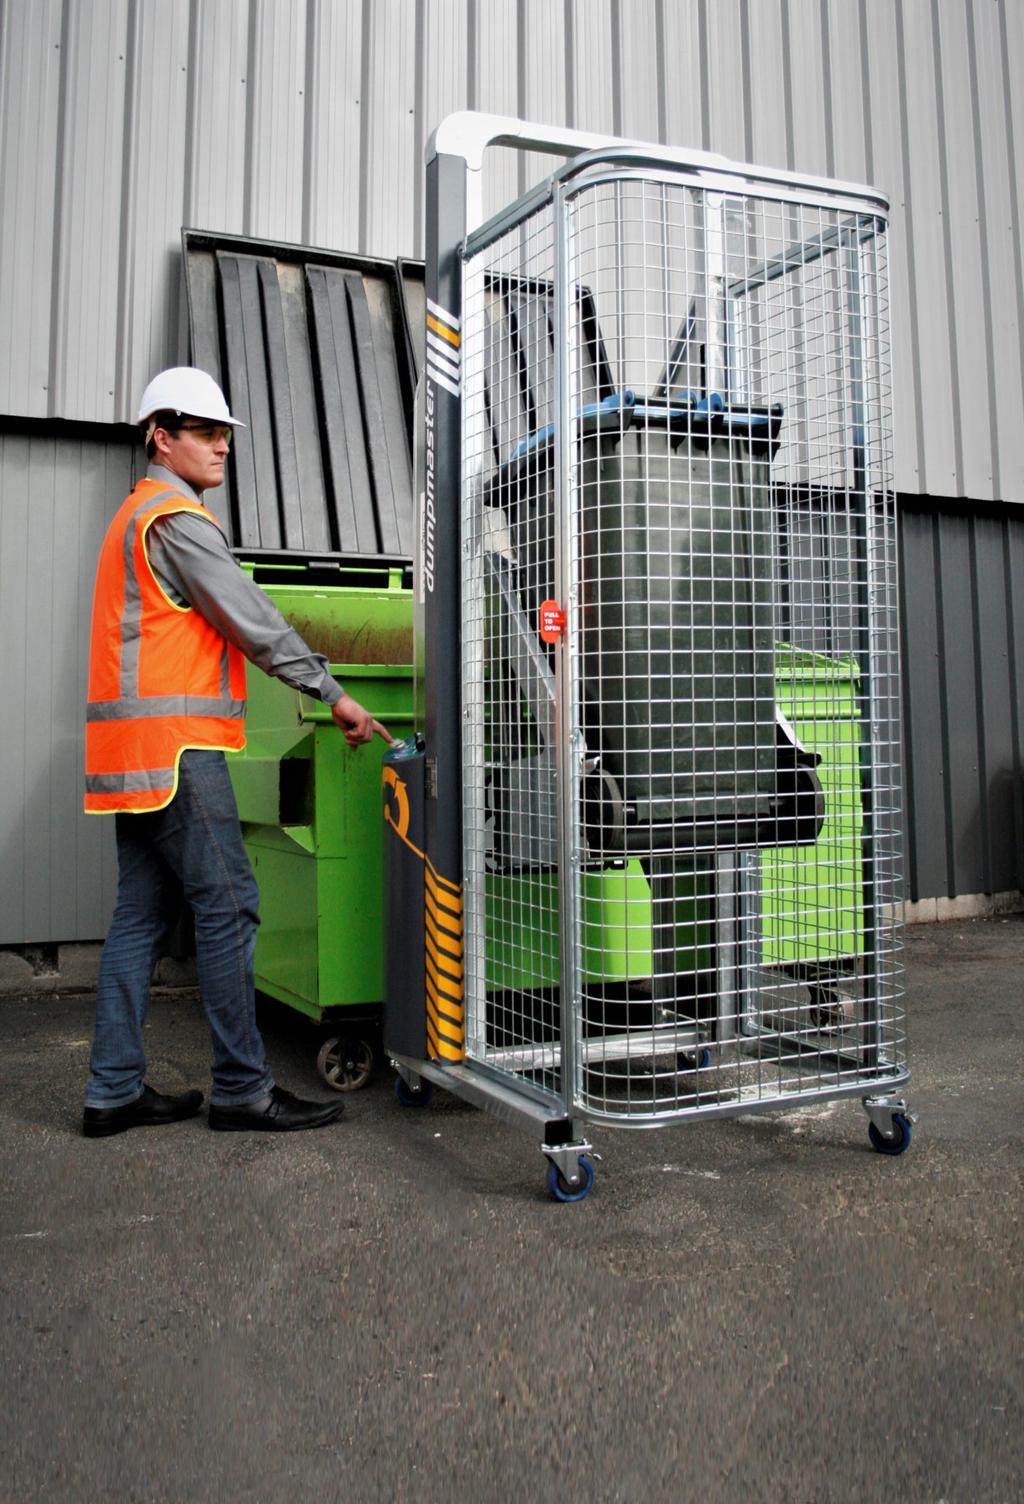 EN840 Waste Handling Equipment Wheelie bin lifting, tipping, moving and cleaning equipment